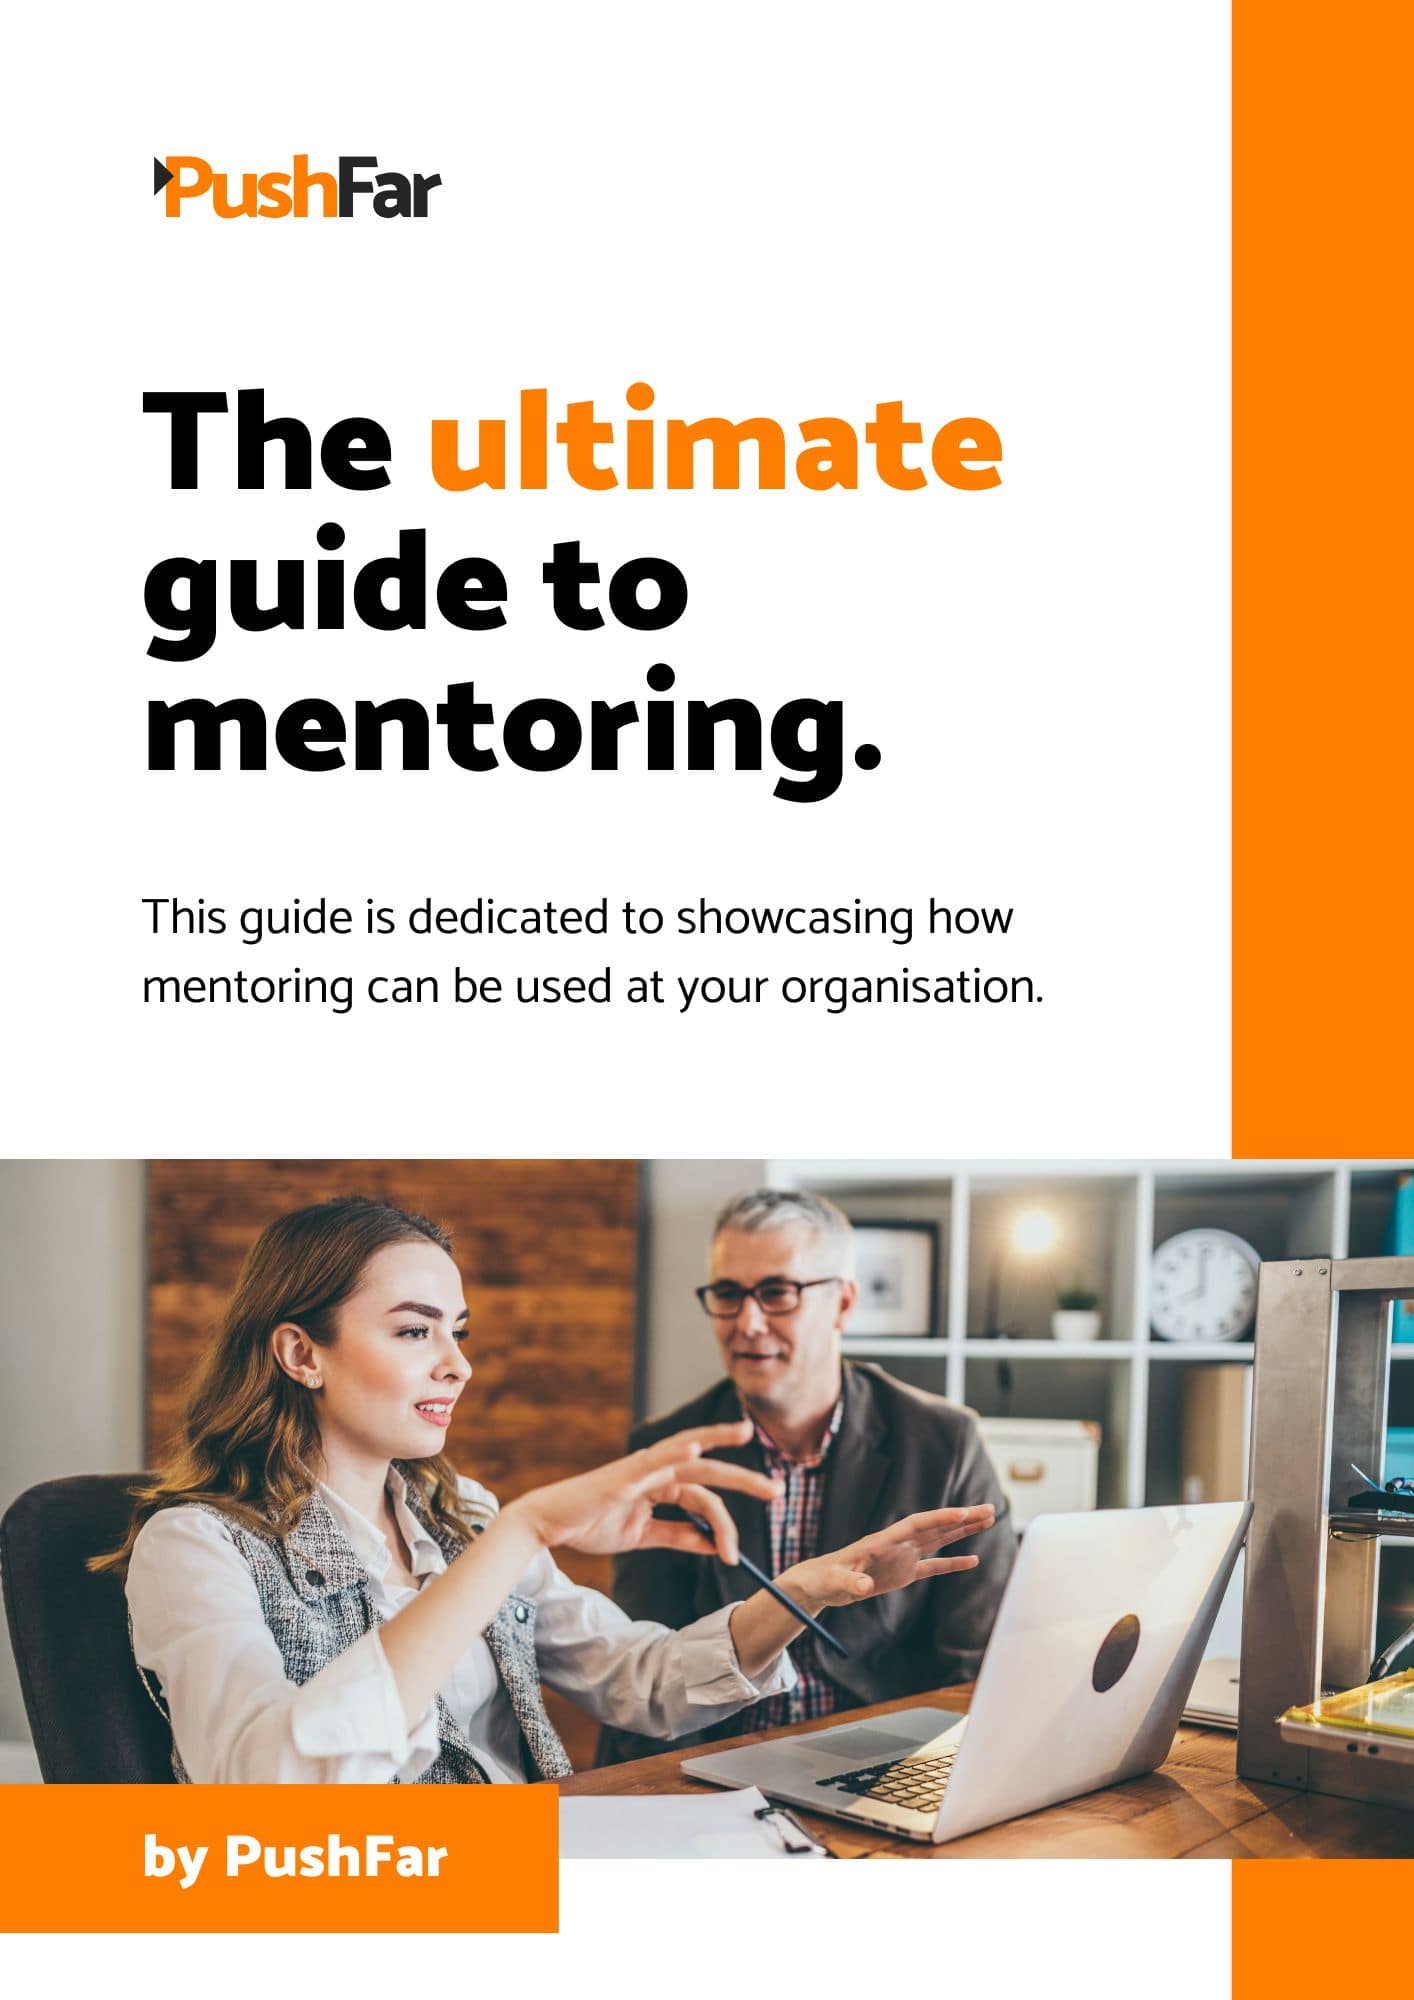 The ultimate guide to mentoring